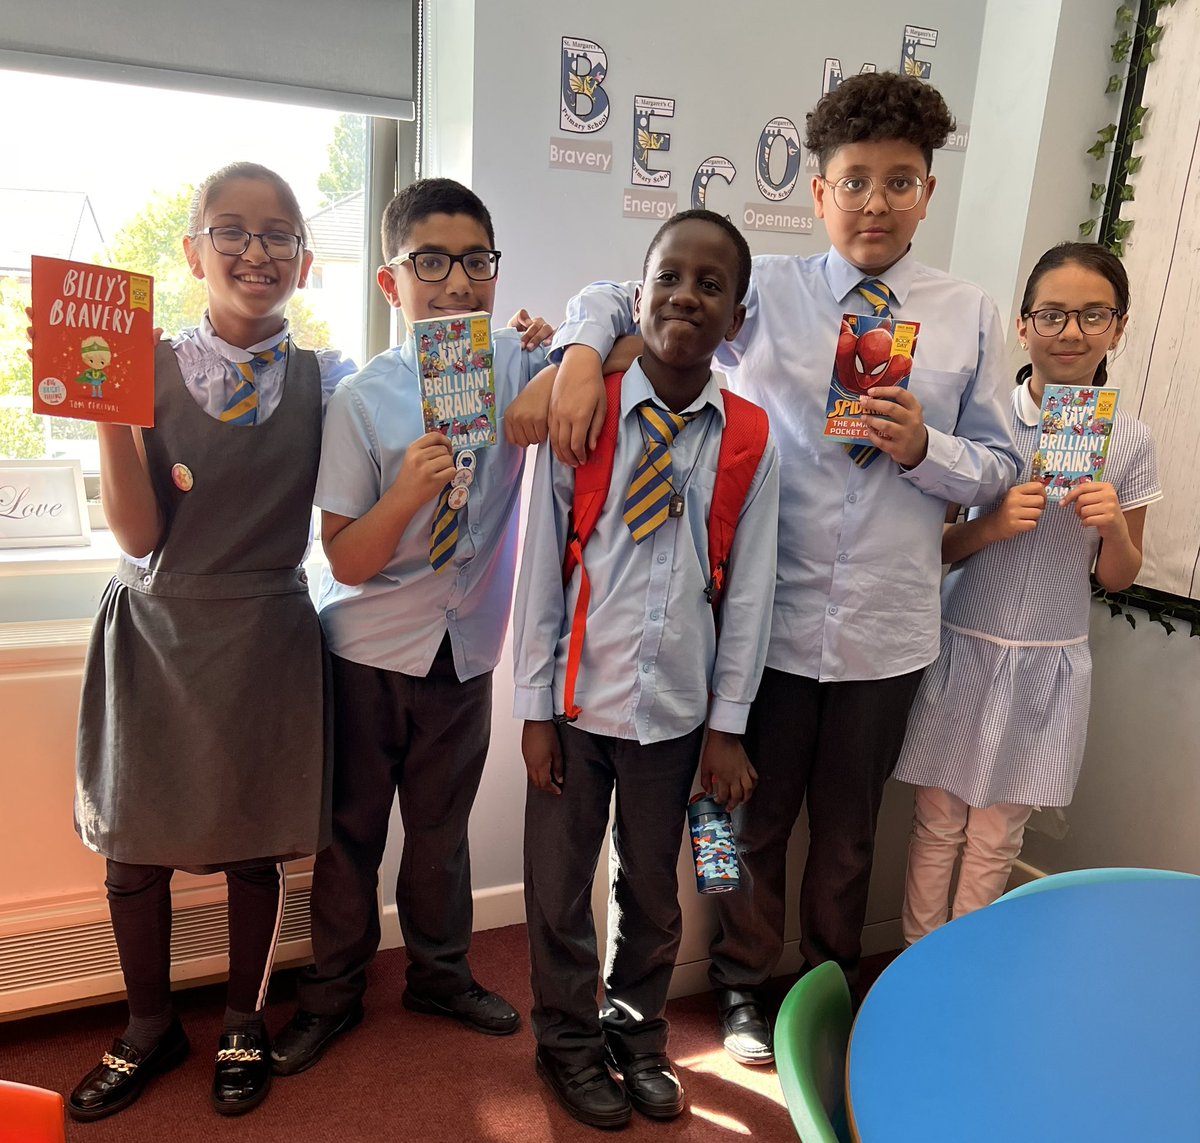 This week it was Michael’s birthday and he chose to gift every pupil in his class a brand new book!📕 Micheal has clearly embraced the St Margaret’s passion for #reading. 
What an incredible act of #kindness #FaithHopeandLove #AplacetoBECOME